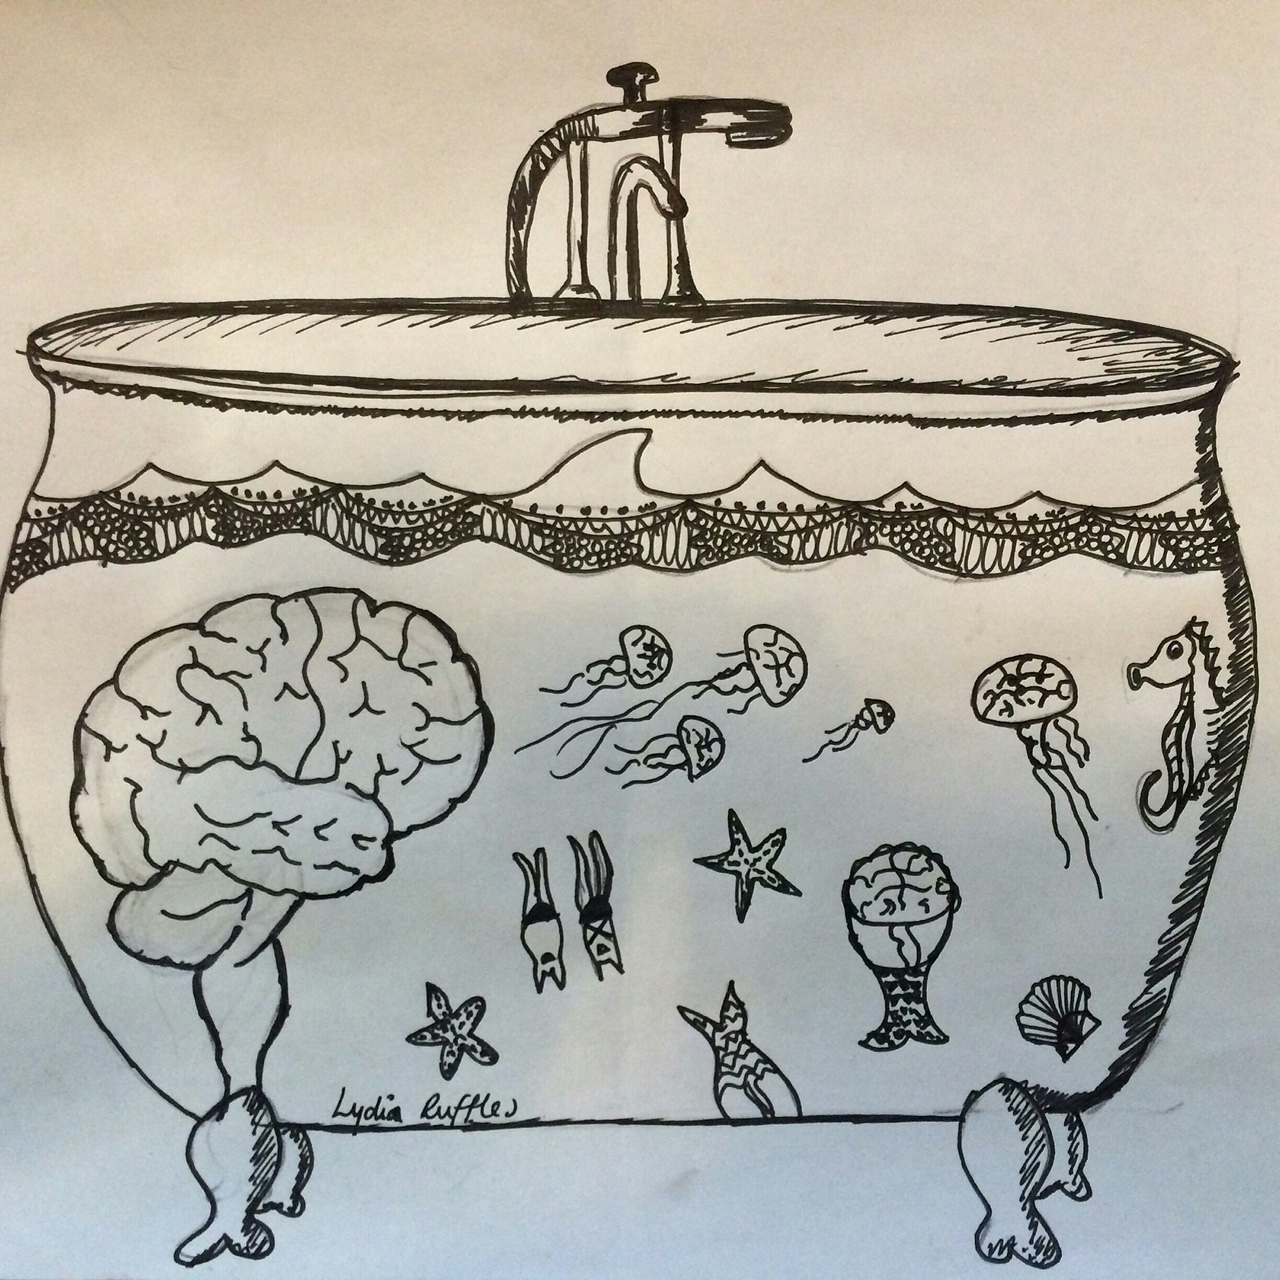 Drawing in black ink of a roll-top bath filled with water, with a brain and various marine creatures inside it.